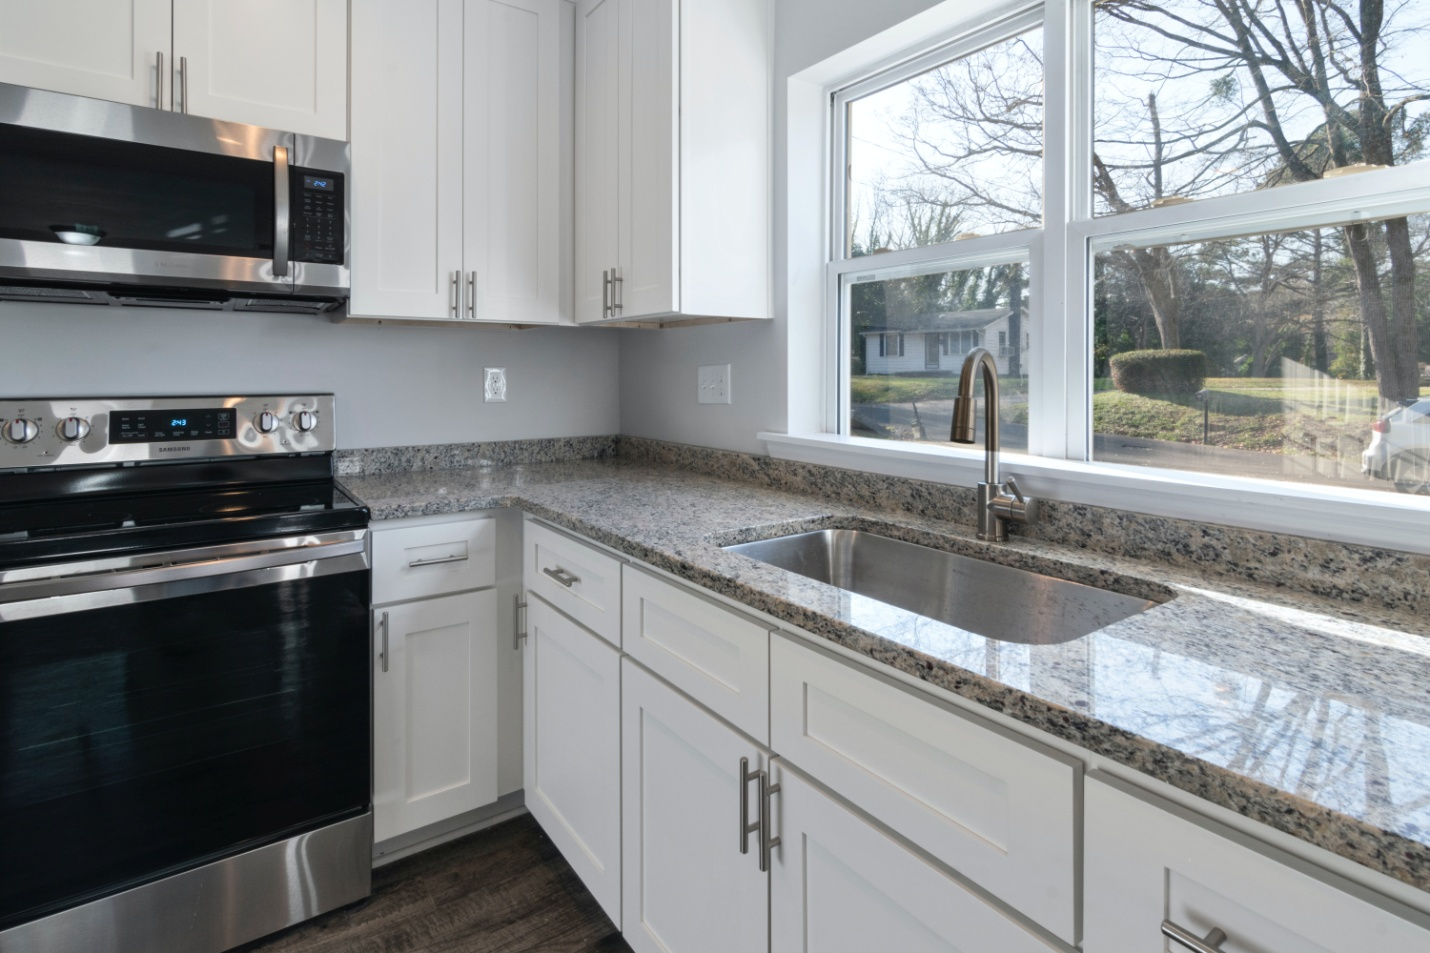 White wooden kitchen cabinets with granite countertops